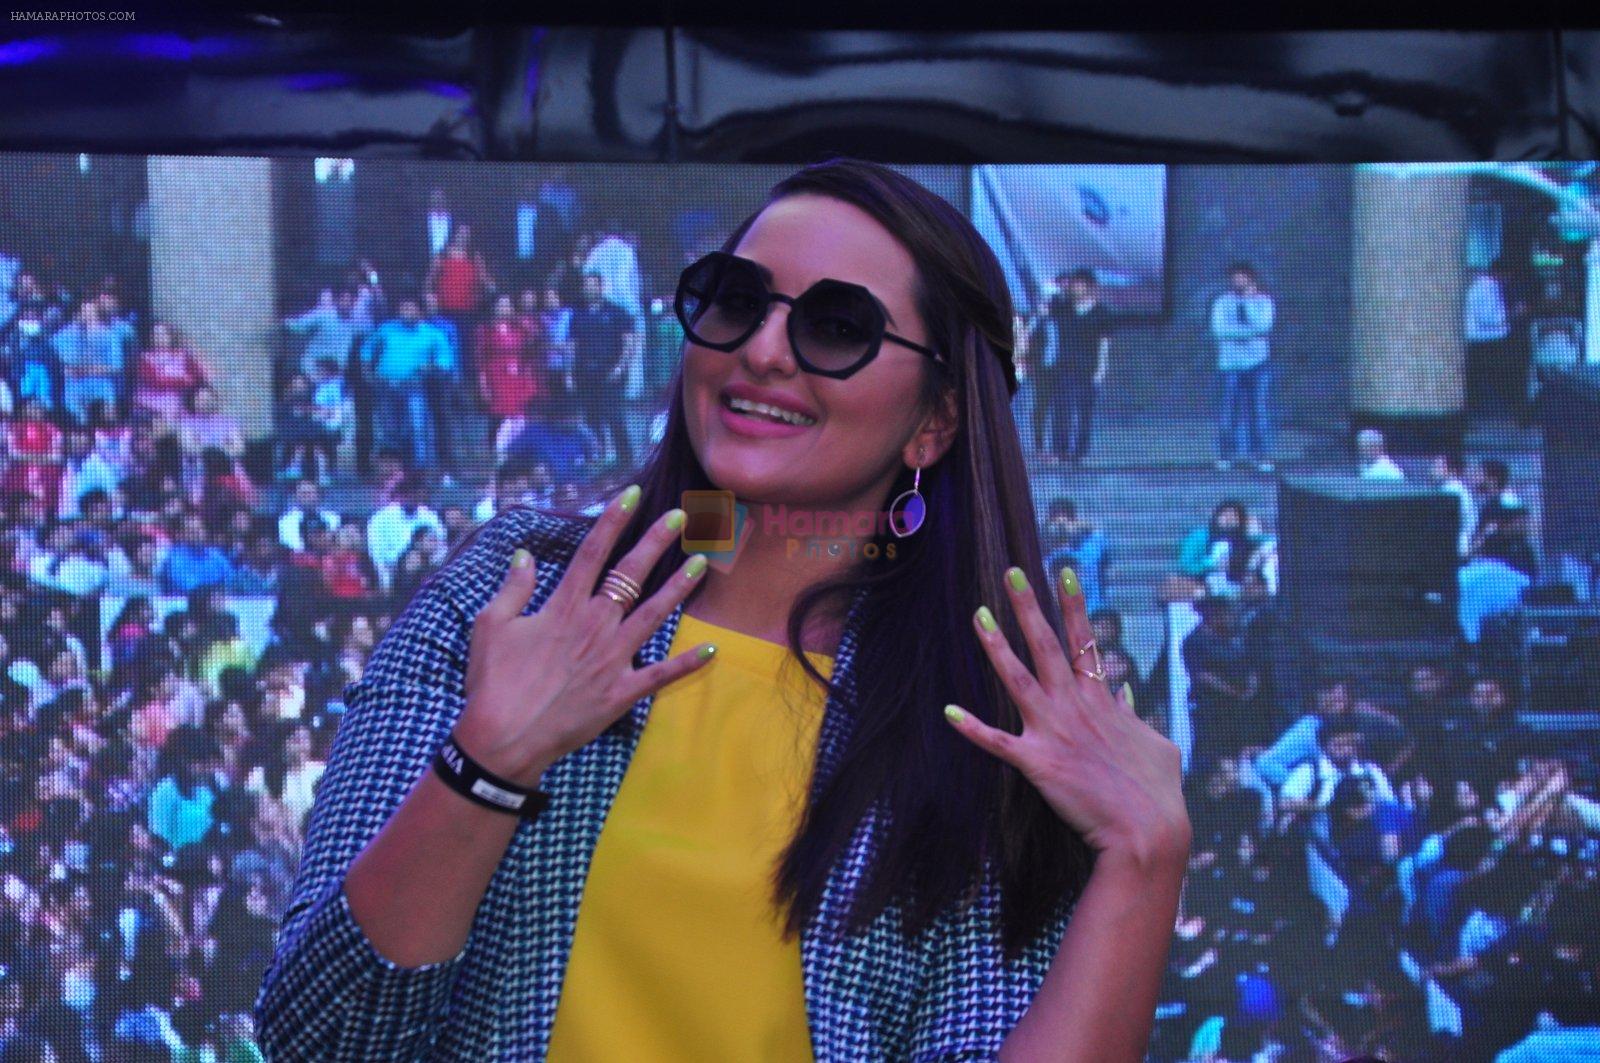 Sonakshi Sinha is now on Guinness Book of Records for painting her nails on Women's Day on 8th March 2016